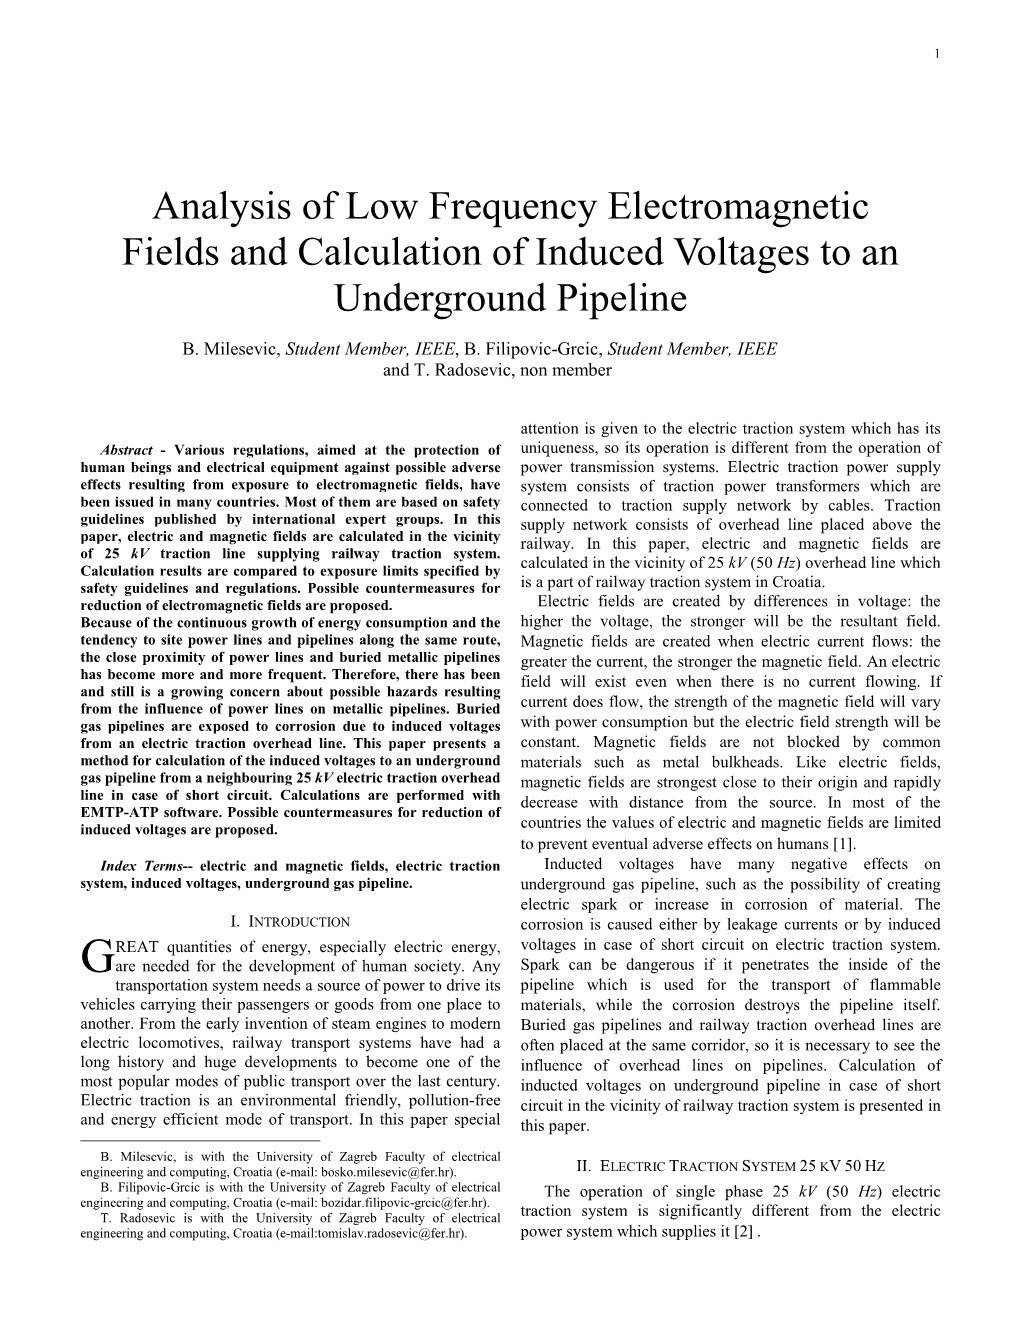 Analysis of Low Frequency Electromagnetic Fields and Calculation of Induced Voltages to an Underground Pipeline